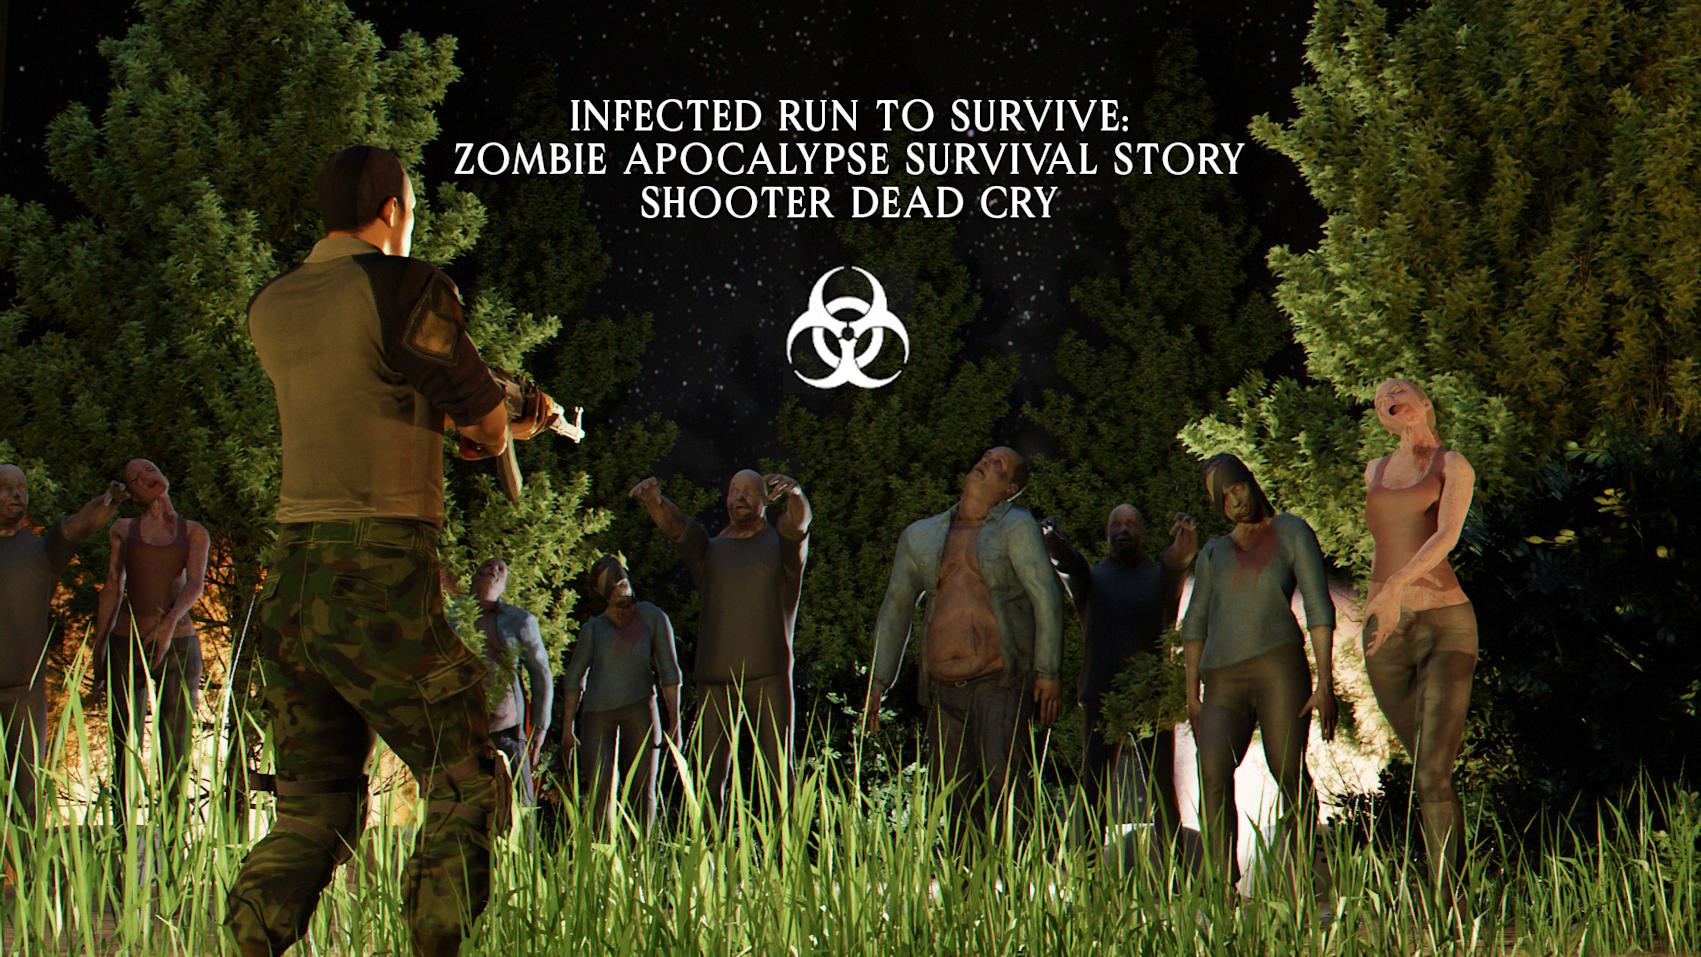 Infected run to Survive: Zombie Apocalypse Survival Story Shooter Dead Cry | Nintendo Switch Trailer